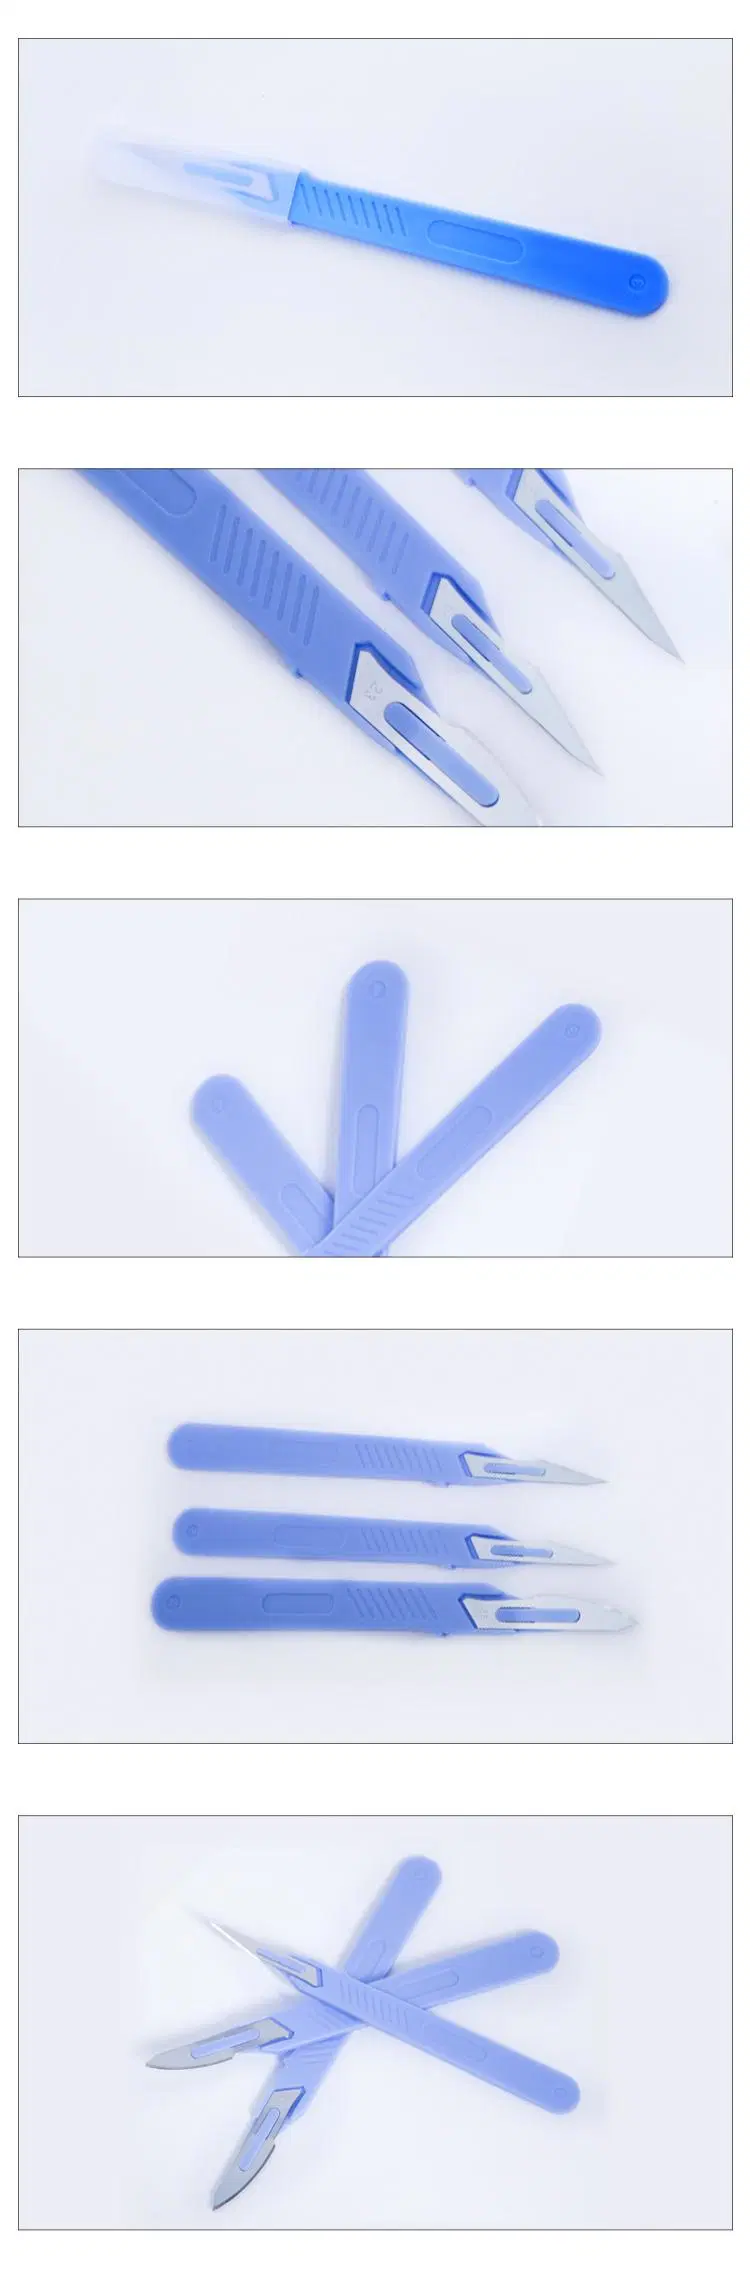 Customized Surgical Scalpel Blades Orders